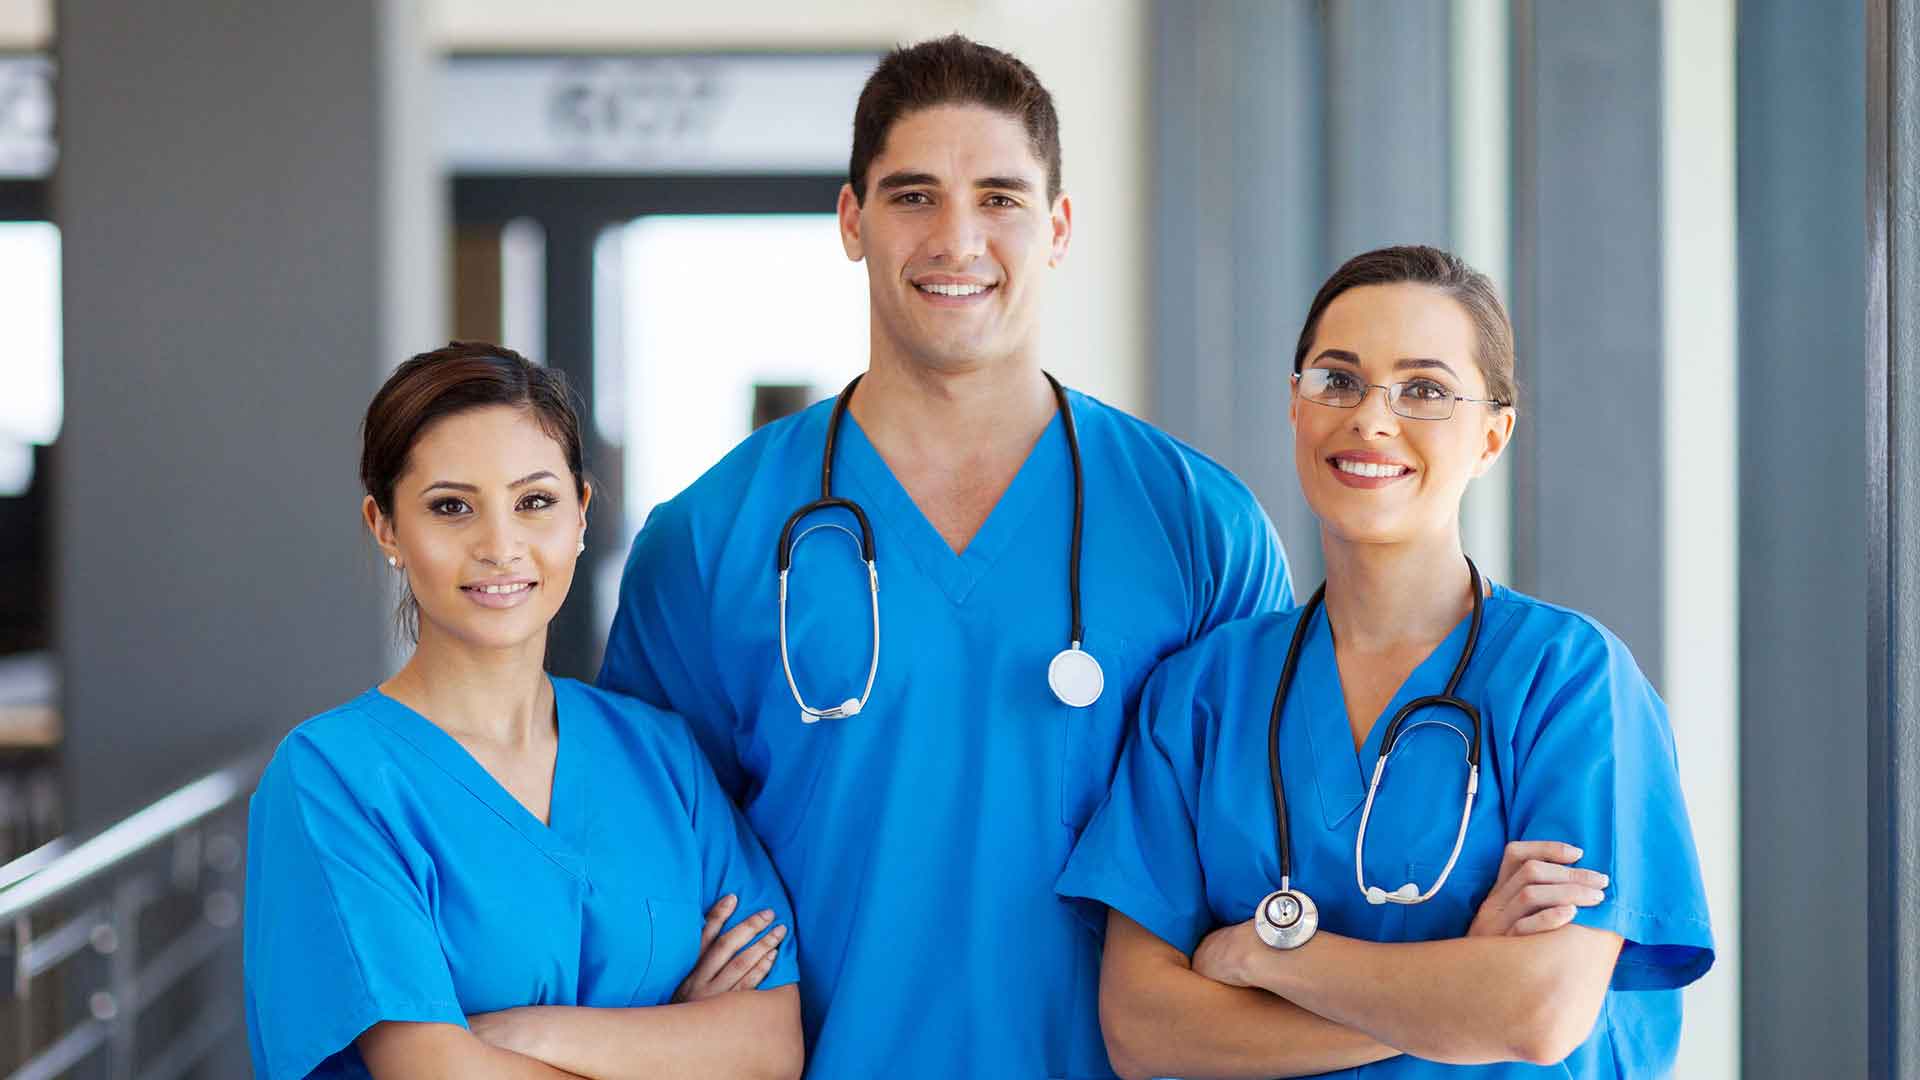 Nurse Services - Maryland Healthcare Support 10